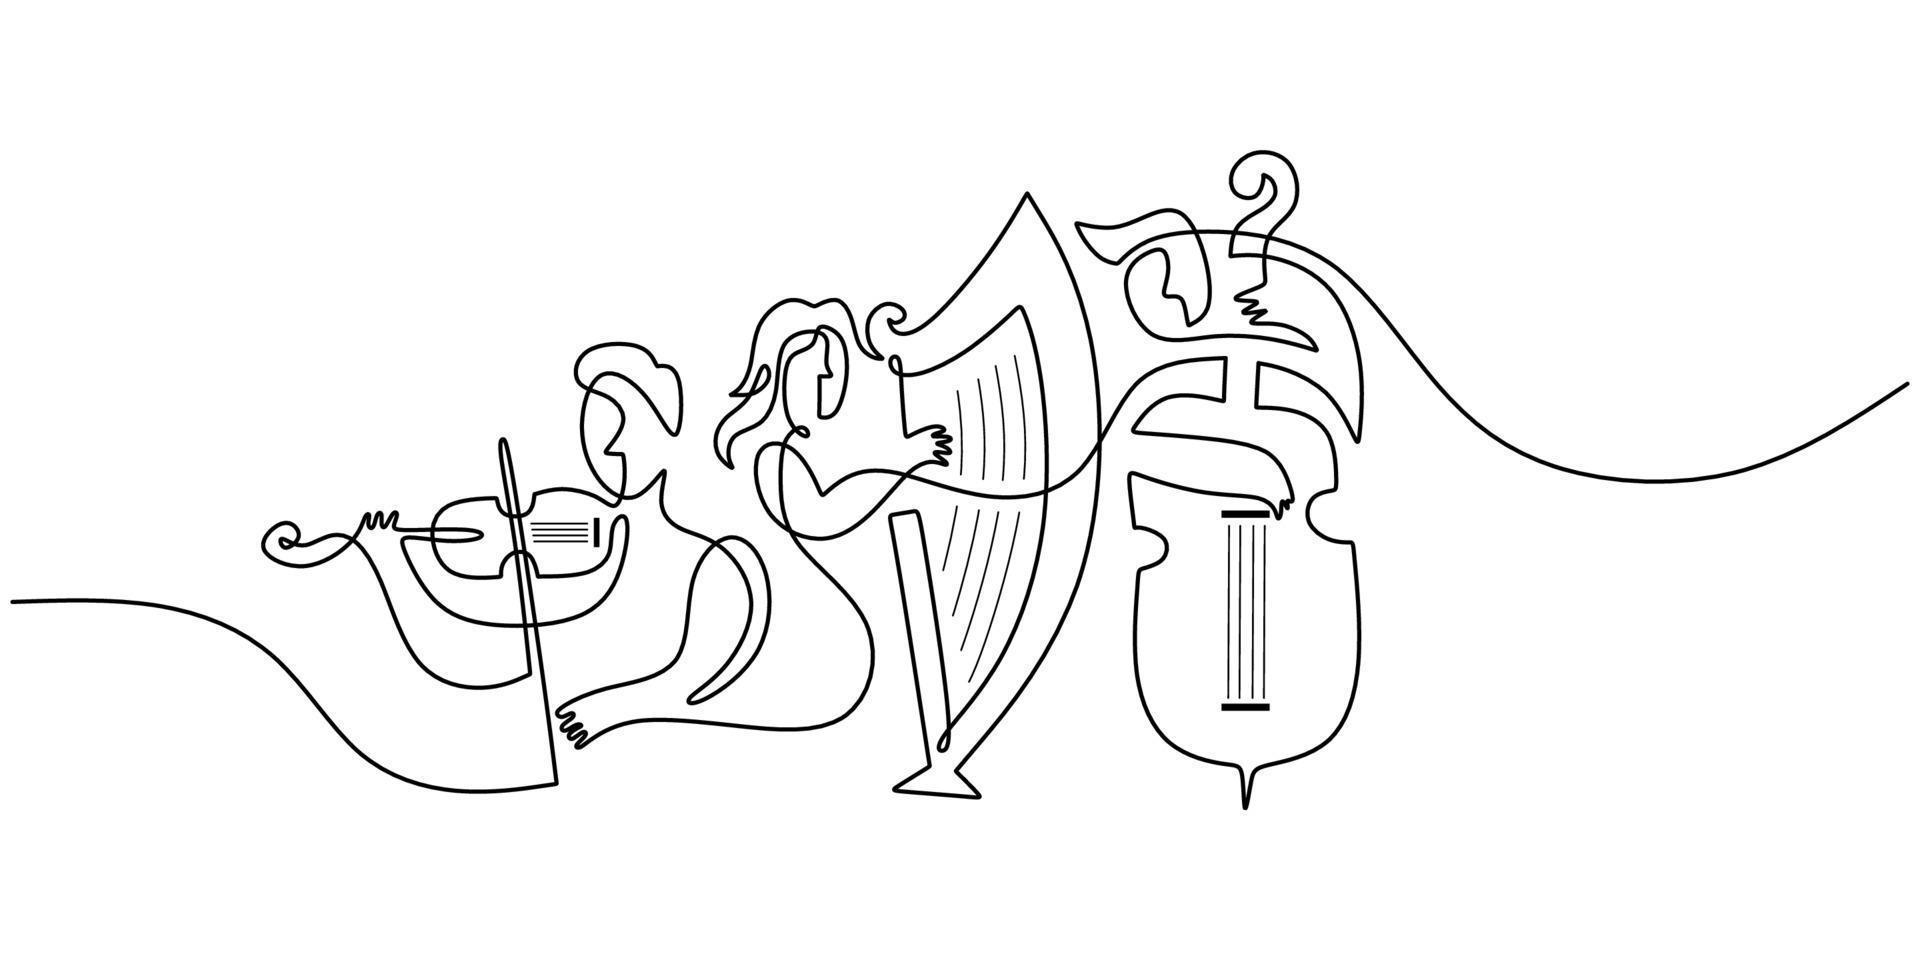 One single continuous line of abstract jazz musician vector